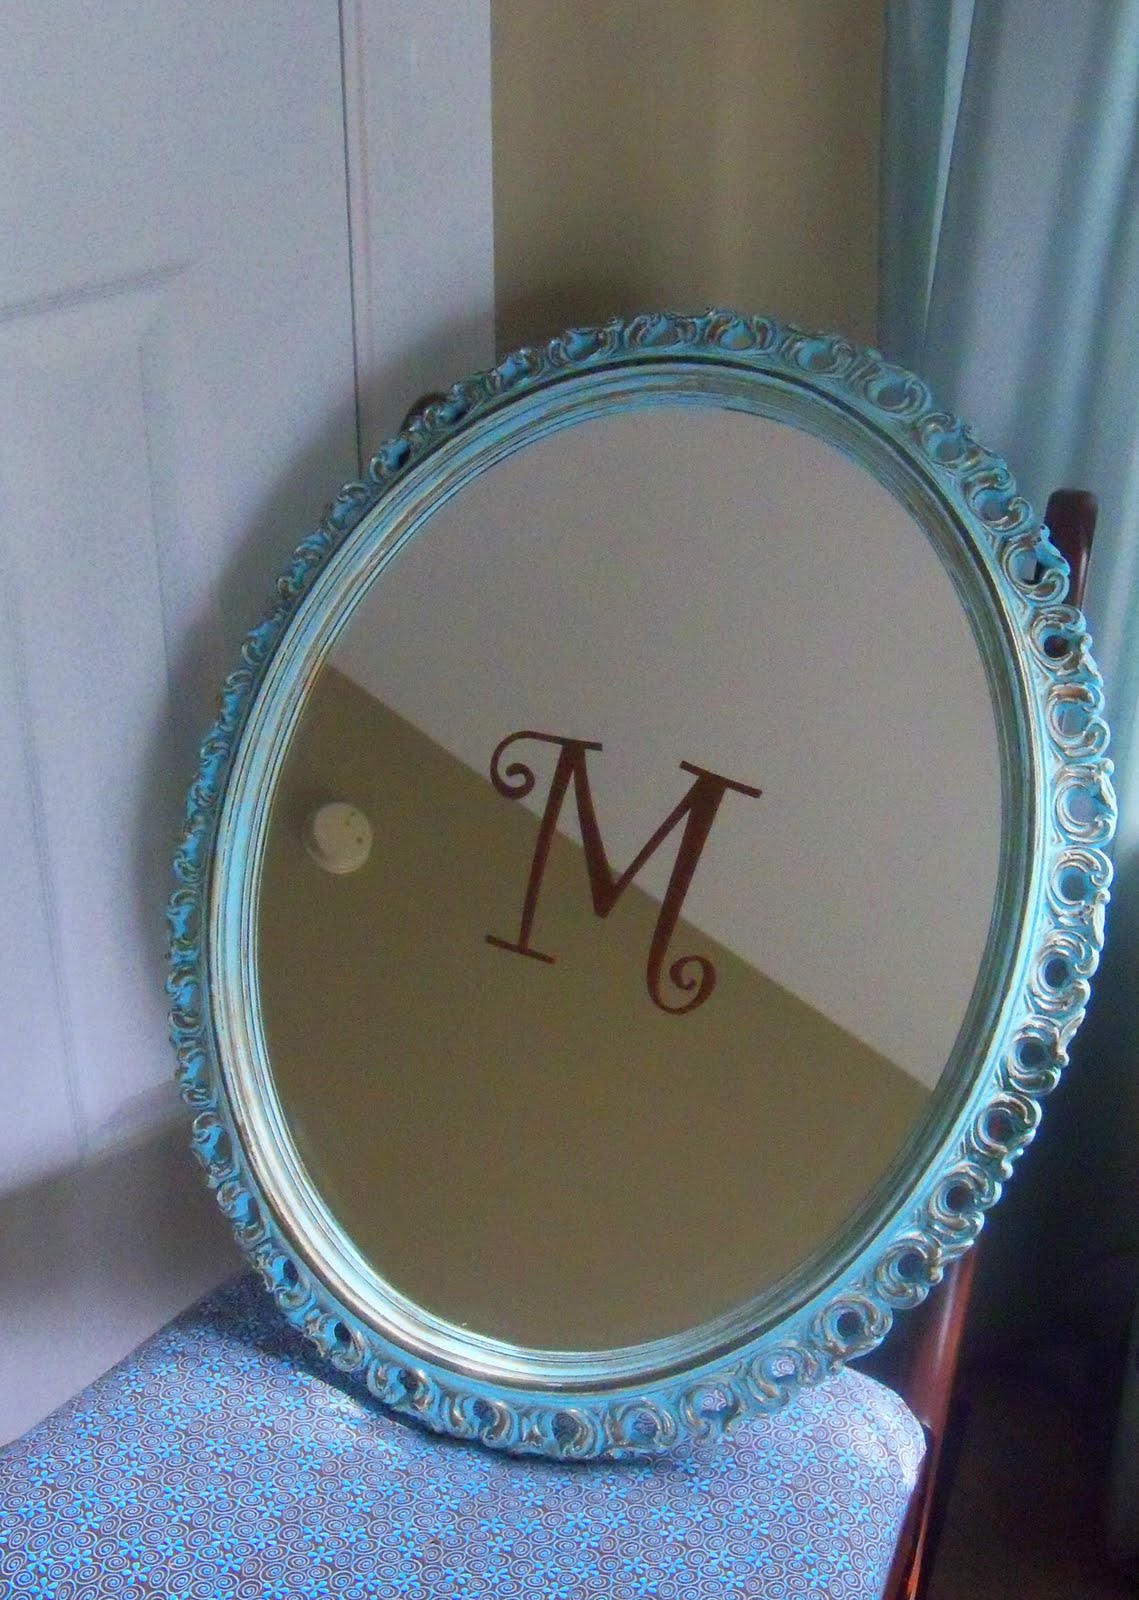 Cool mirror before and after makeover - Debbiedoos